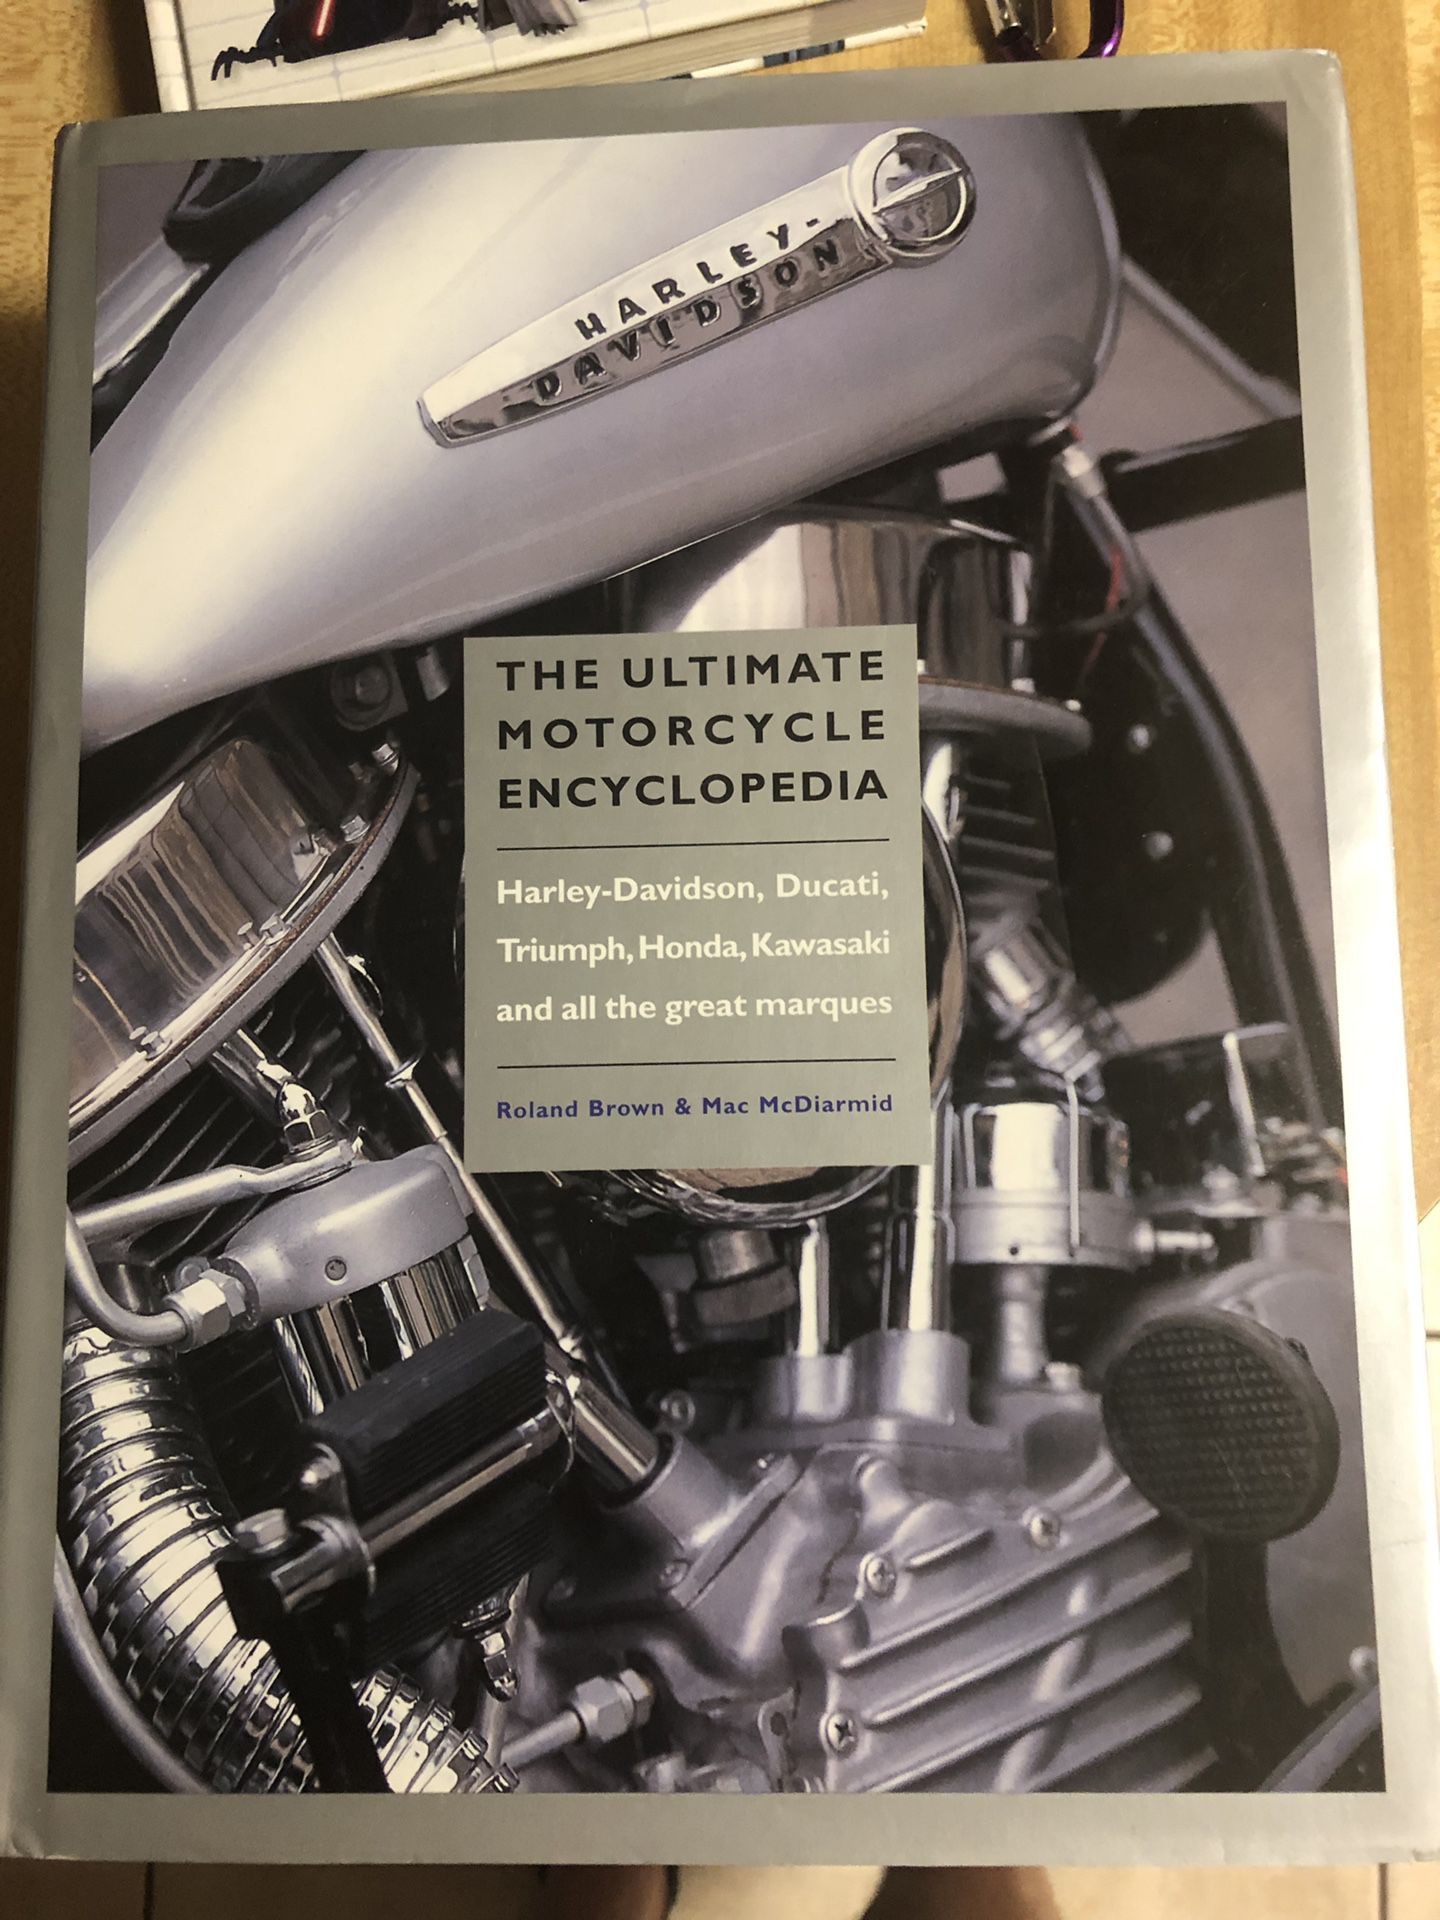 The ultimate Motorcycle encyclopedia including Harley Davidson , Ducati,Triumph,Honda, Kawasaki, asking 15 firm over 500 pages in N Lakeland